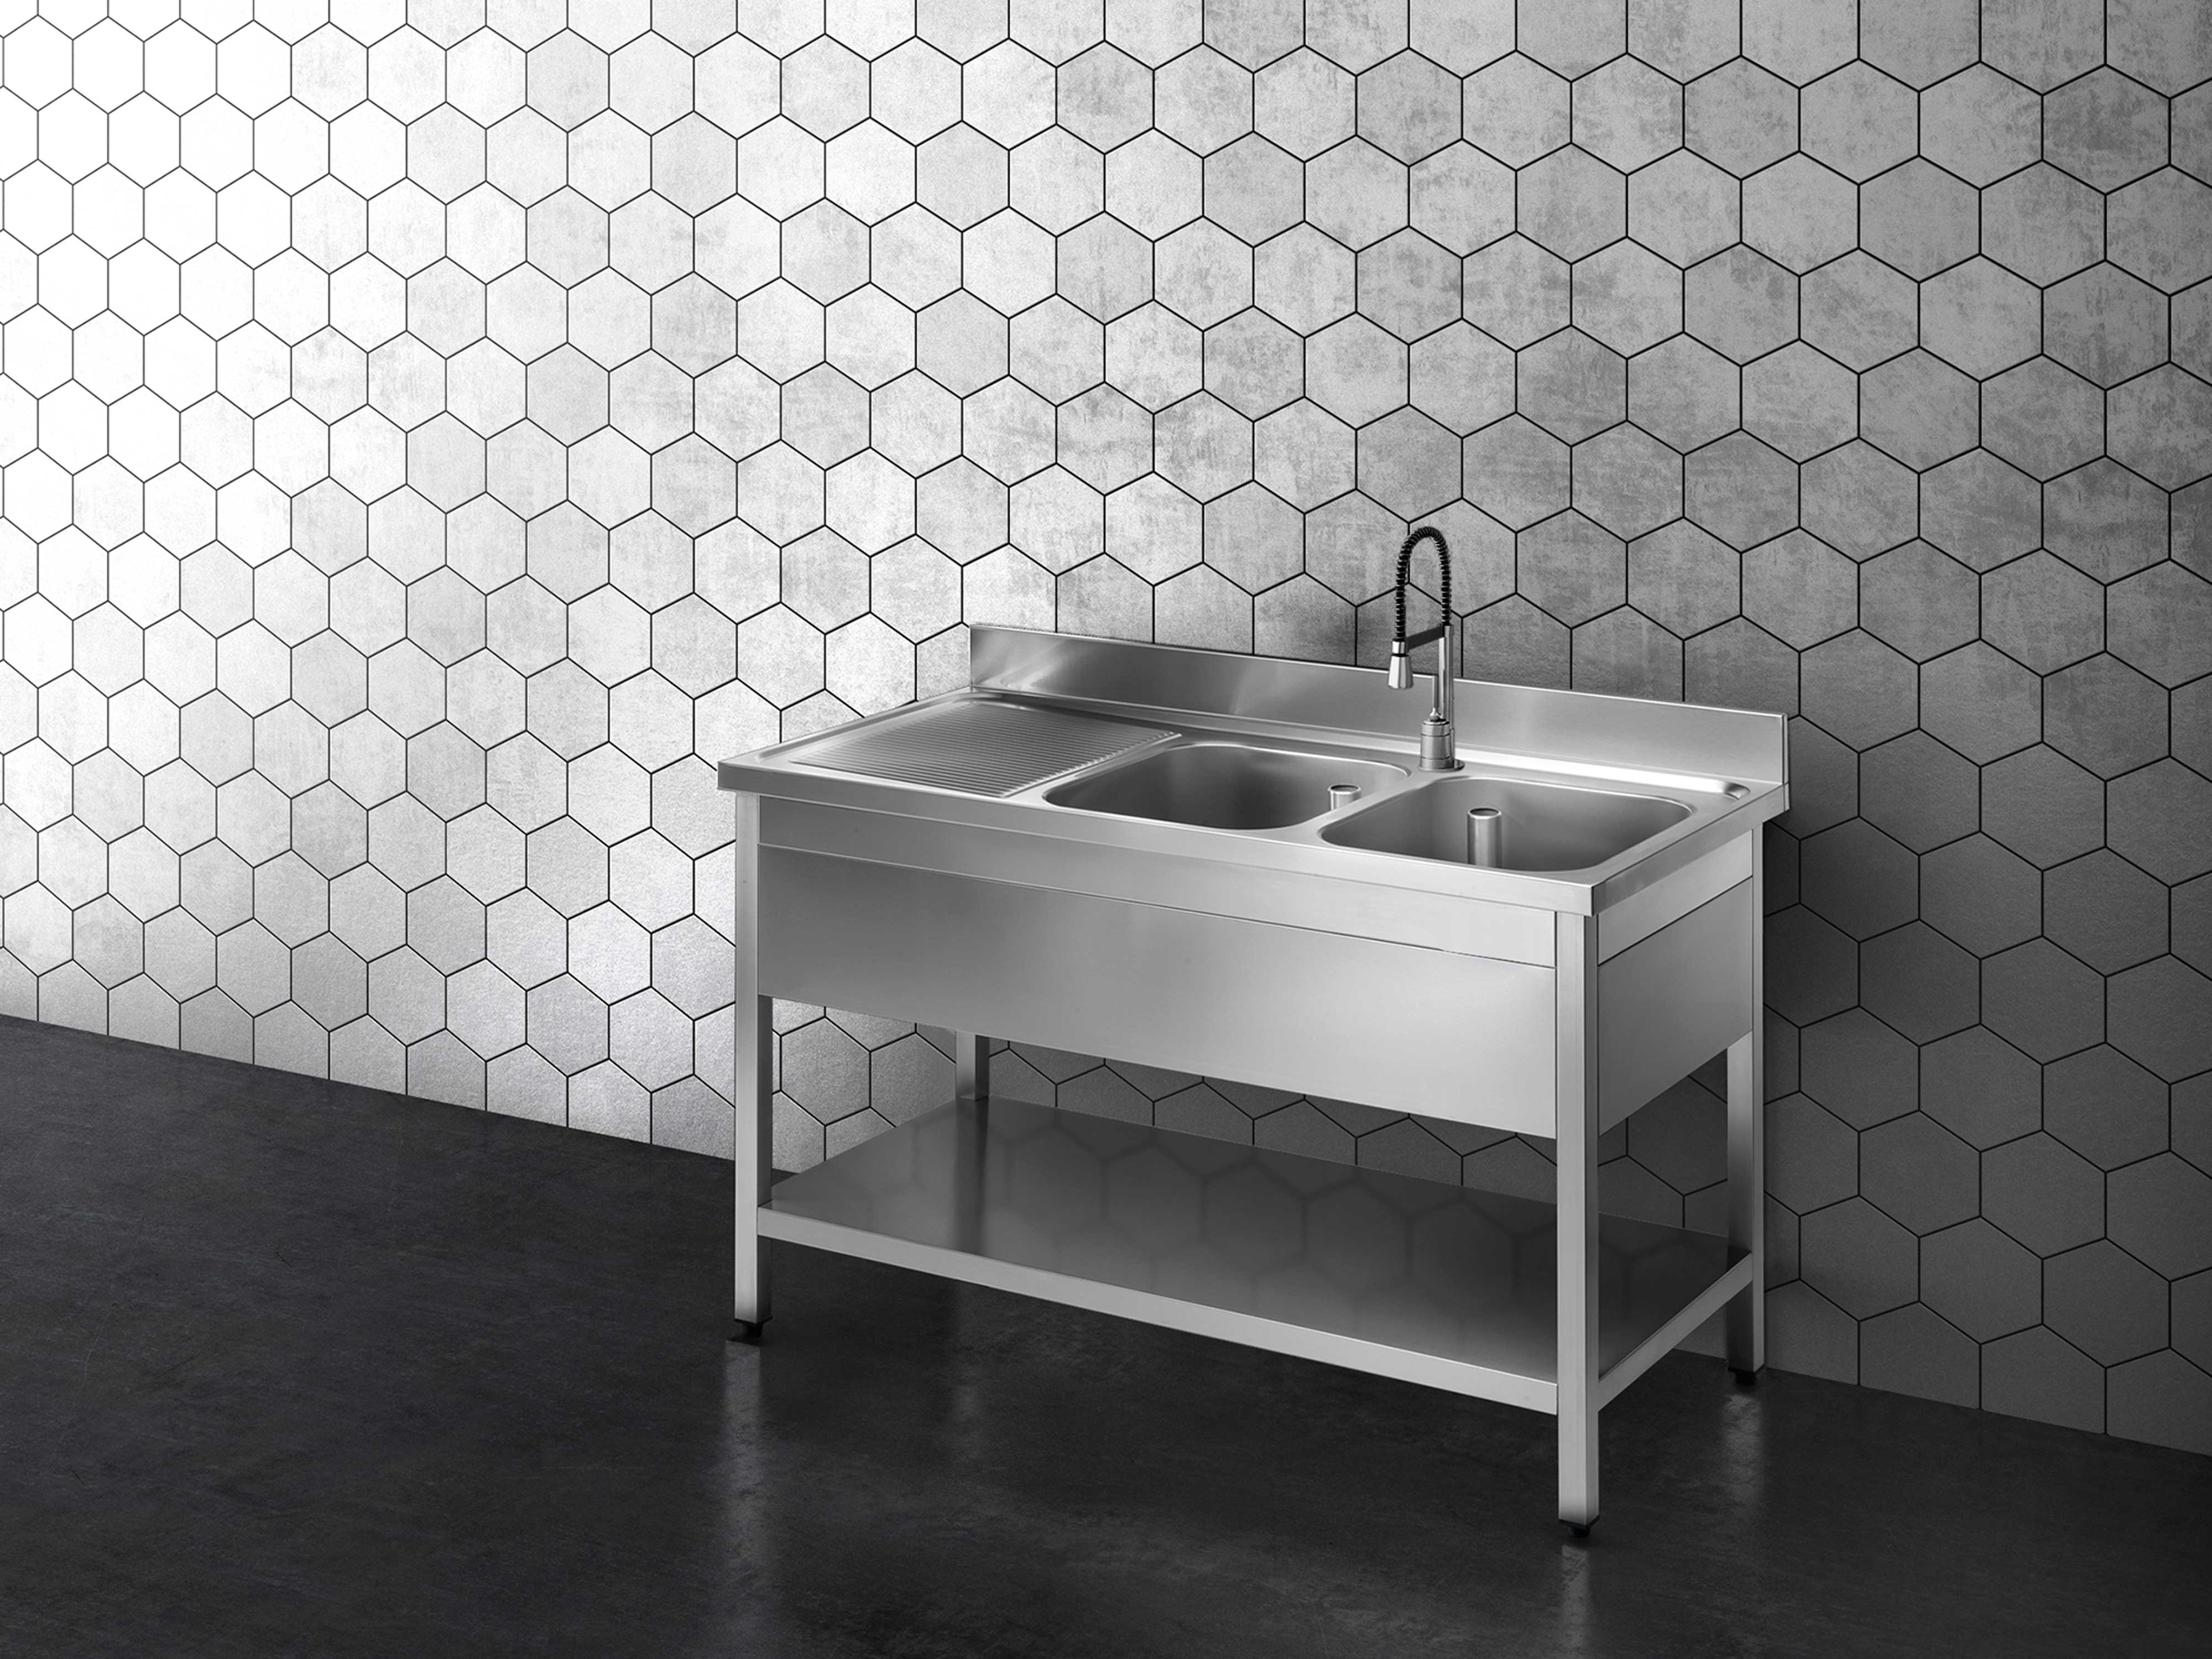  Tables, cabinets and sinks in stainless steel